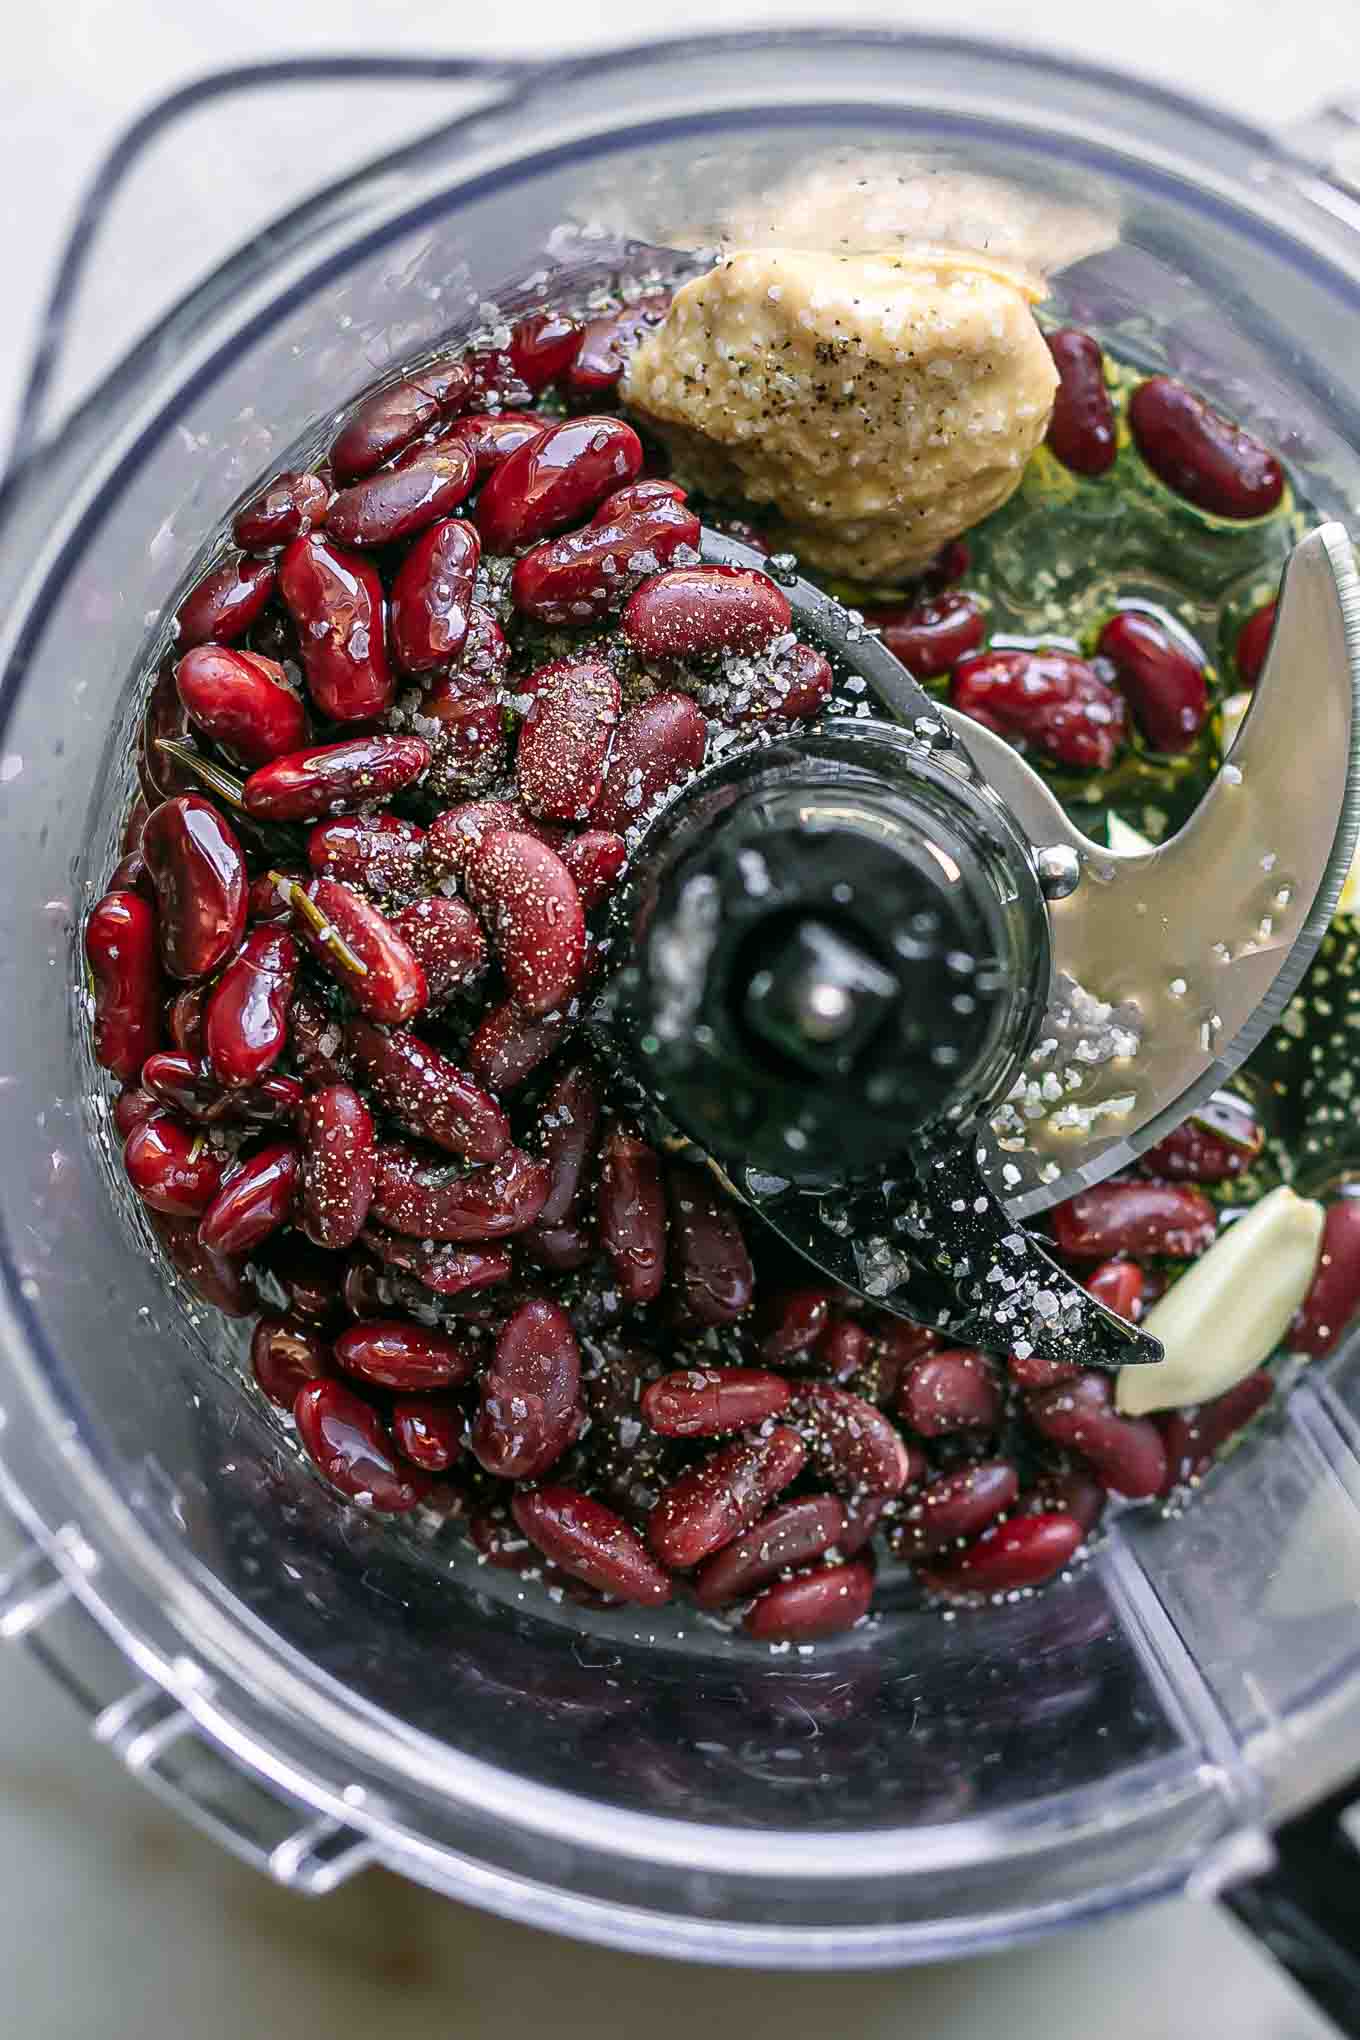 kidney beans, tahini, garlic, and other ingredients for hummus inside a food processor before blending